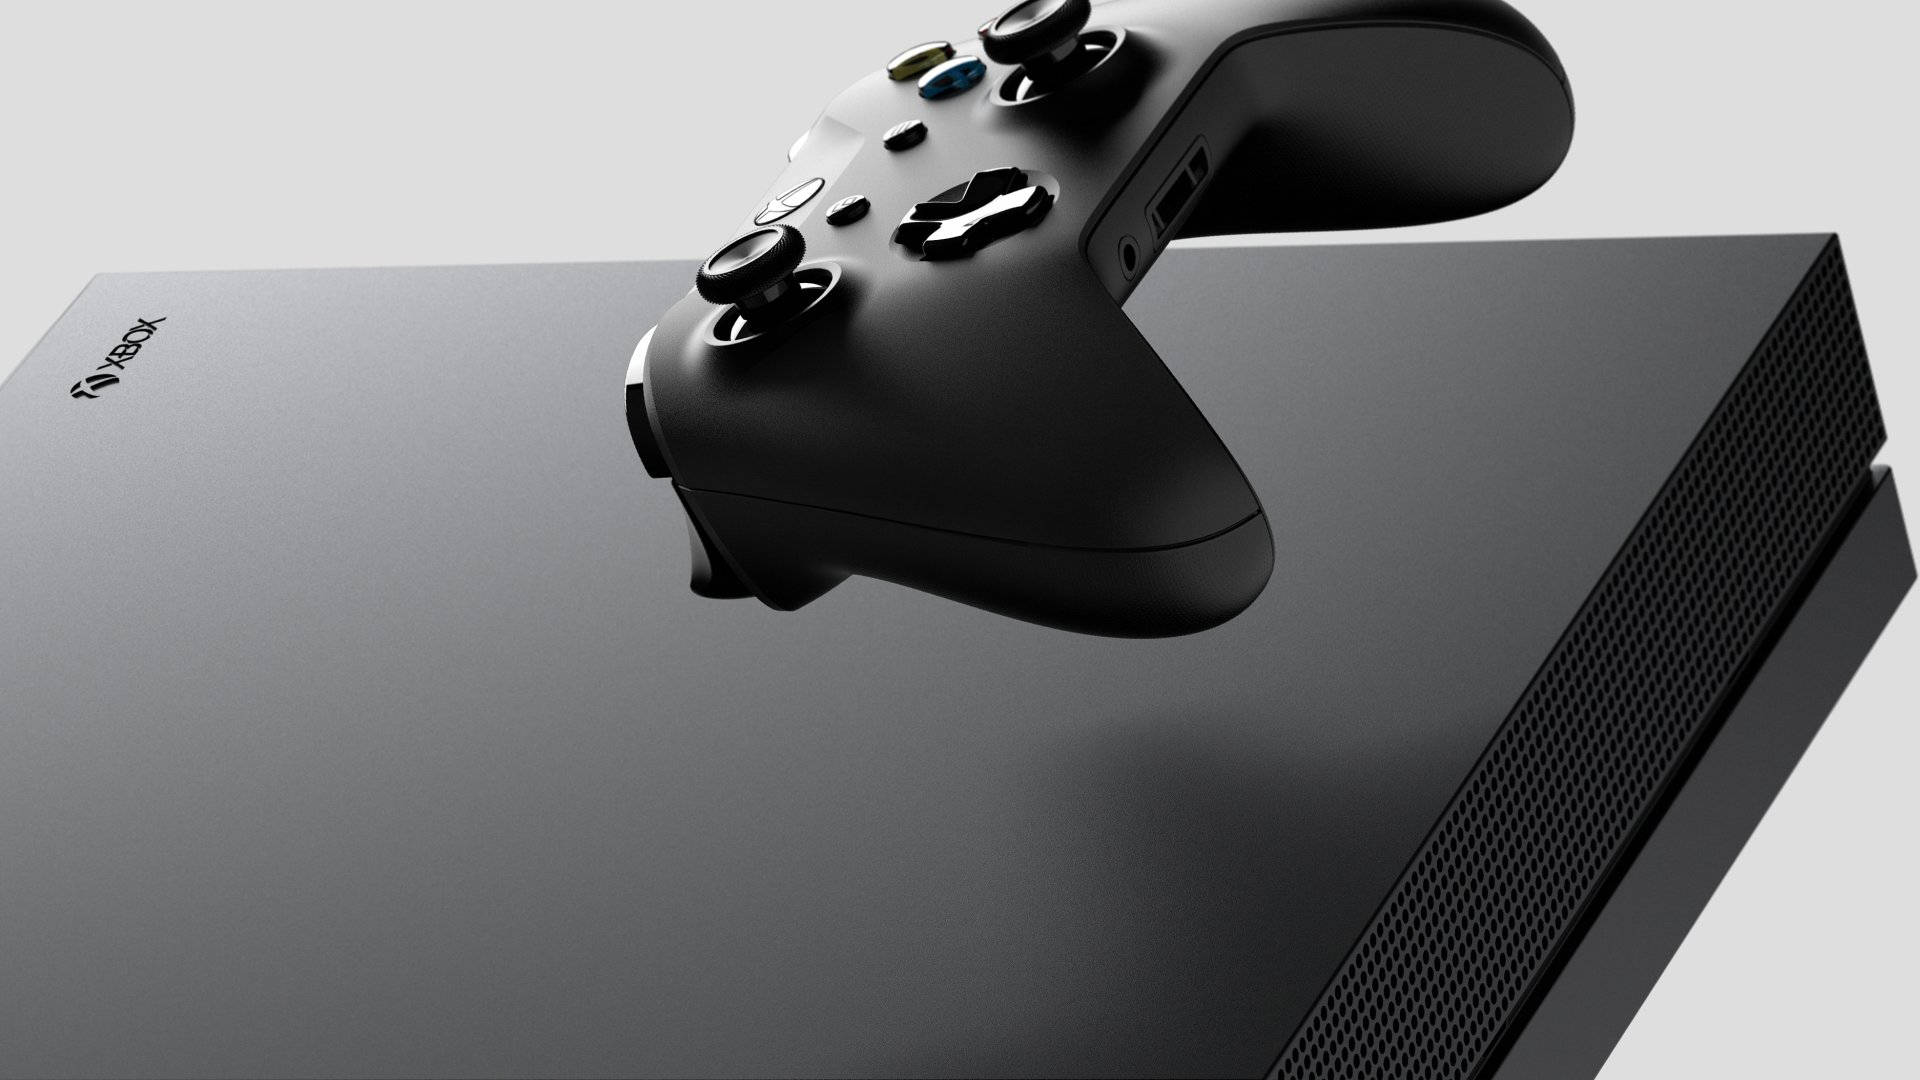 Xbox One X Console And New Controller Wallpaper